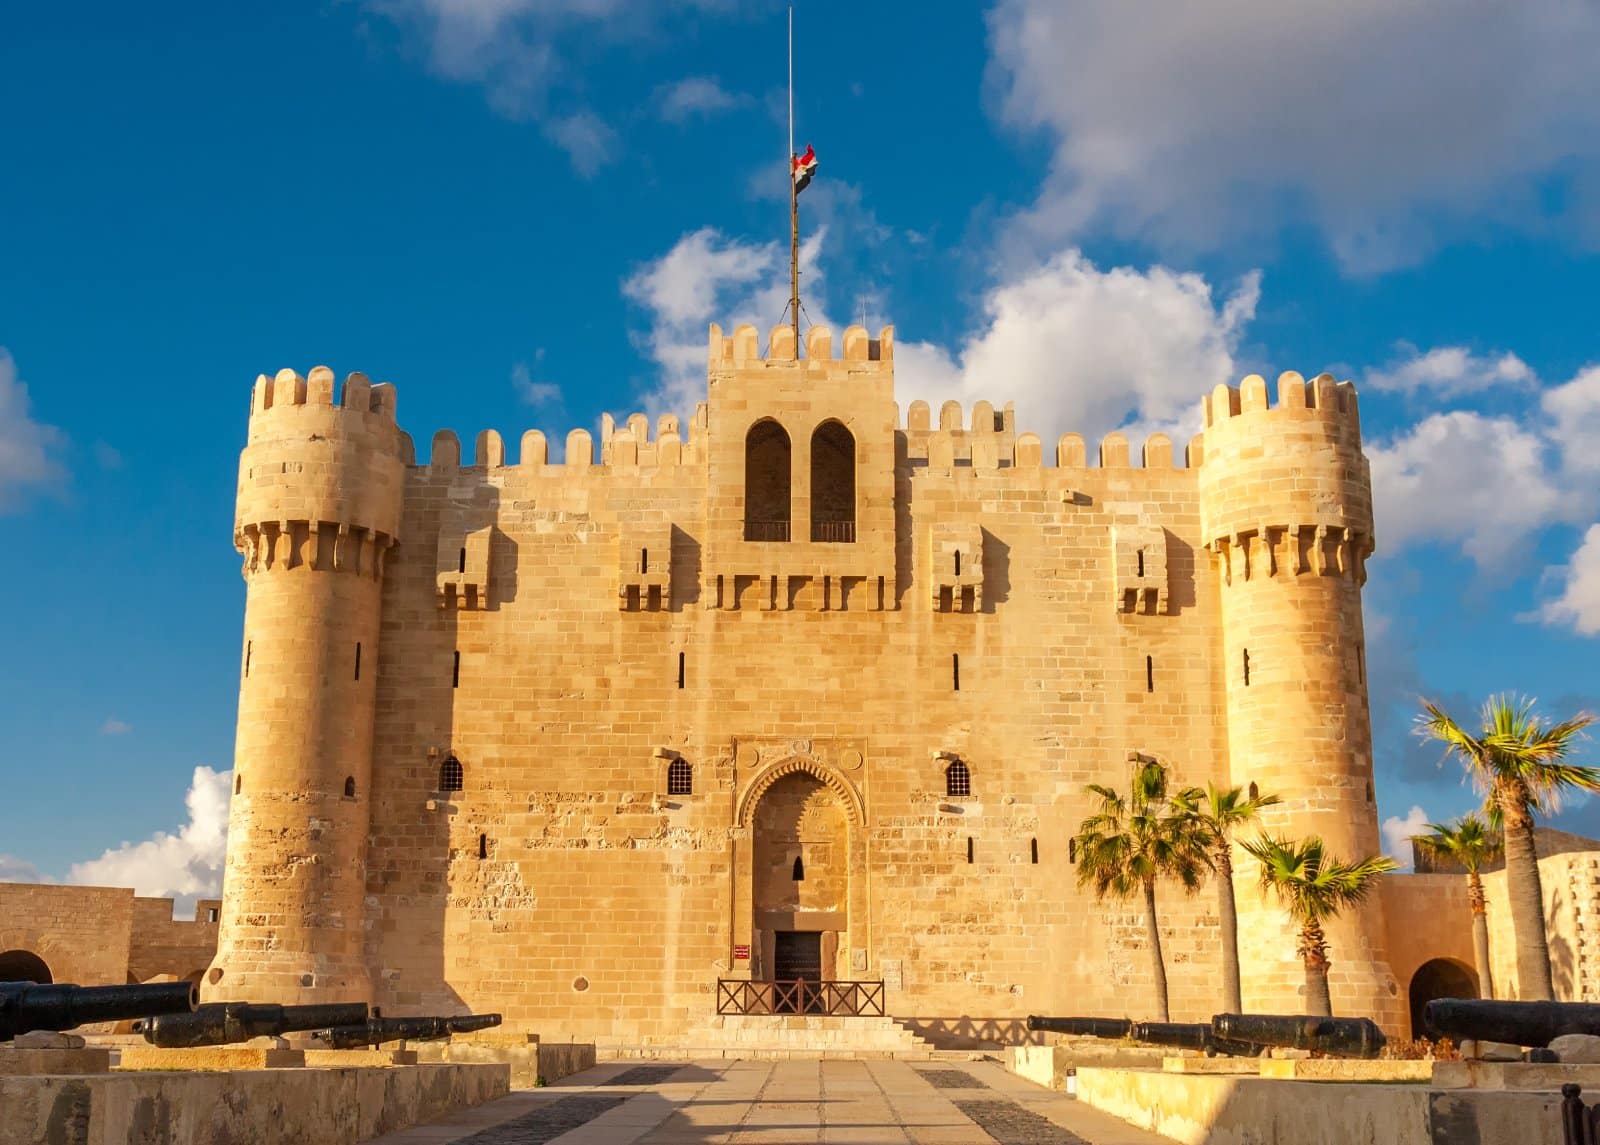 <p class="wp-caption-text">Image Credit: Shutterstock / kerenby</p>  <p><span>Alexandria, the Mediterranean port city, blends history with modernity. The Bibliotheca Alexandrina, a tribute to the ancient Library of Alexandria, is a center of culture and learning, while Fort Qaitbey offers insights into the city’s military past.</span></p>